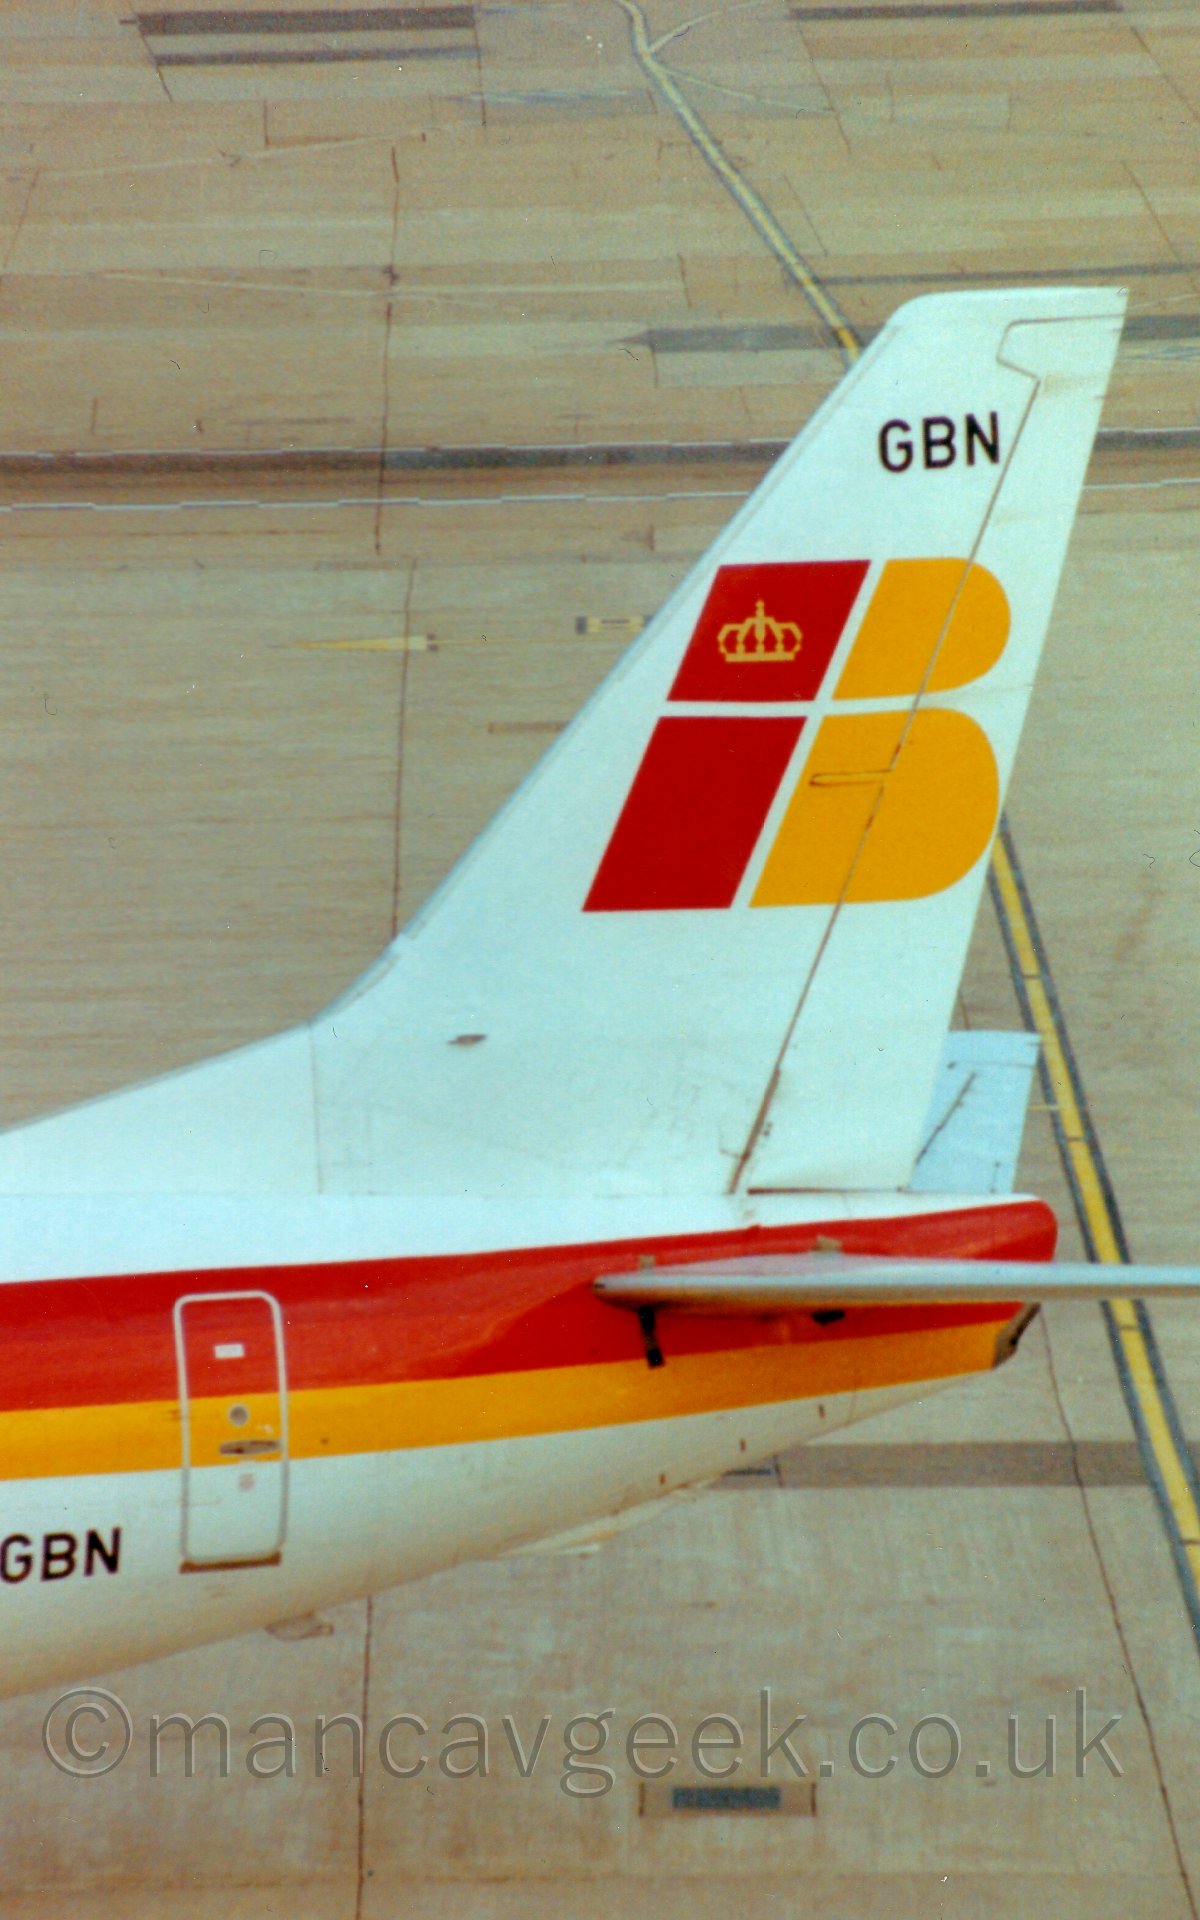 Closeup of the tail of a jet airliner taxiing from right to left. The plane is mostly white, with a thick red and yellow stripe running along the body. The tail is also white, with large red lower case letters "IB" in red and yellow respectively, the "I" having a golden crown in the dot at the top. Smaller letters "GBN" can be seen in black at the top of the tail, and on the lower rear fuselage. The background is entirely made up of concrete slabs of apron area.